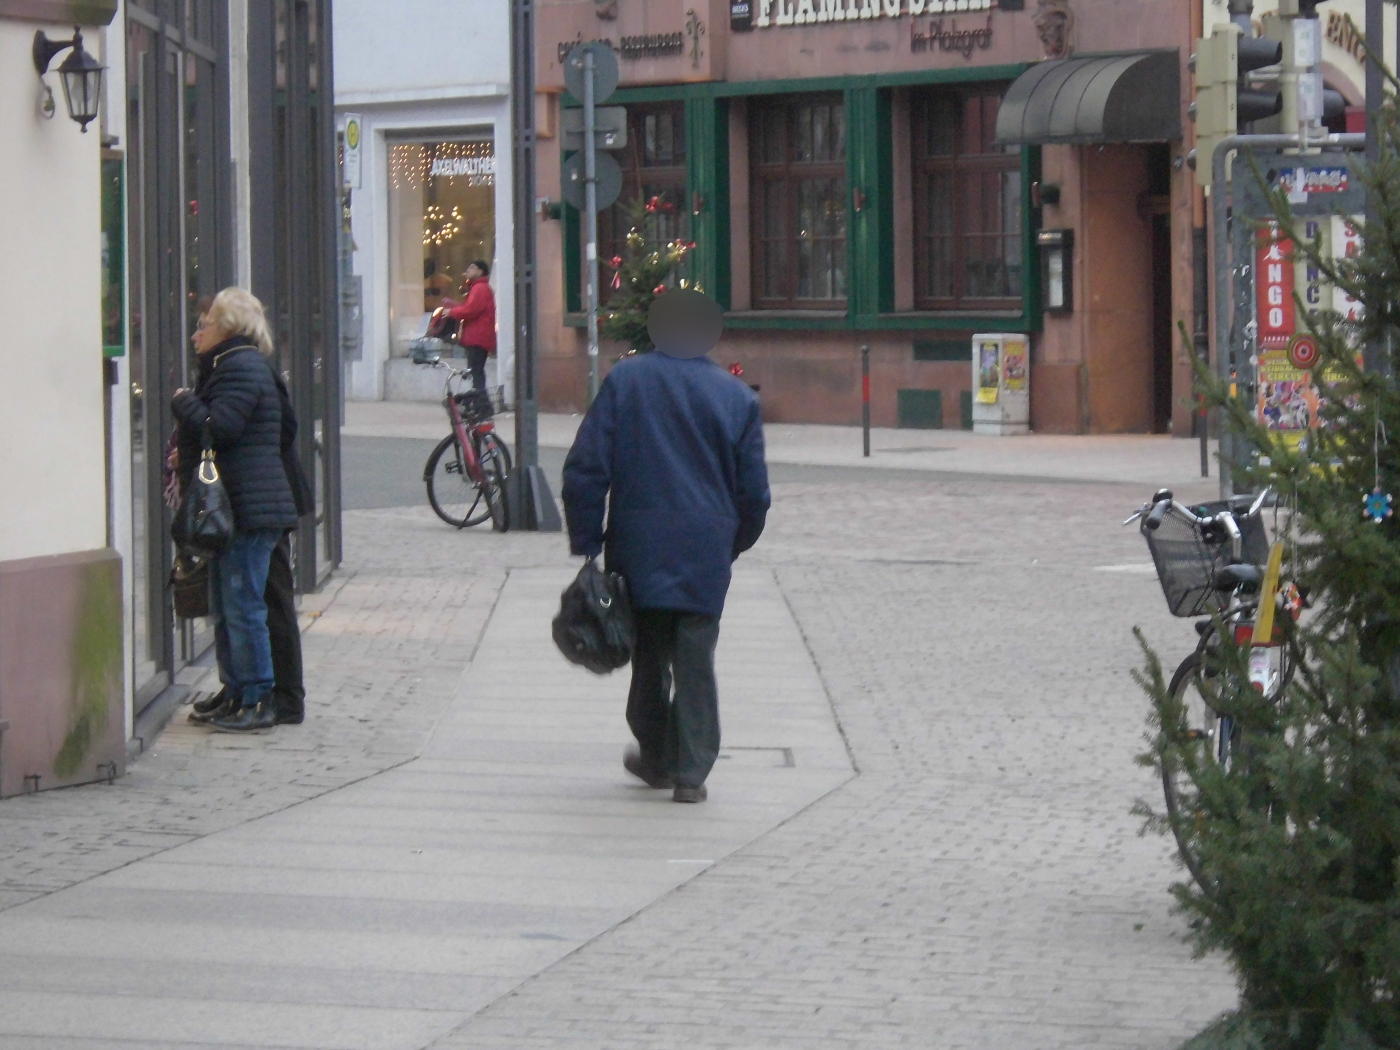 Speyer: almost no Jehovah's Witnesses